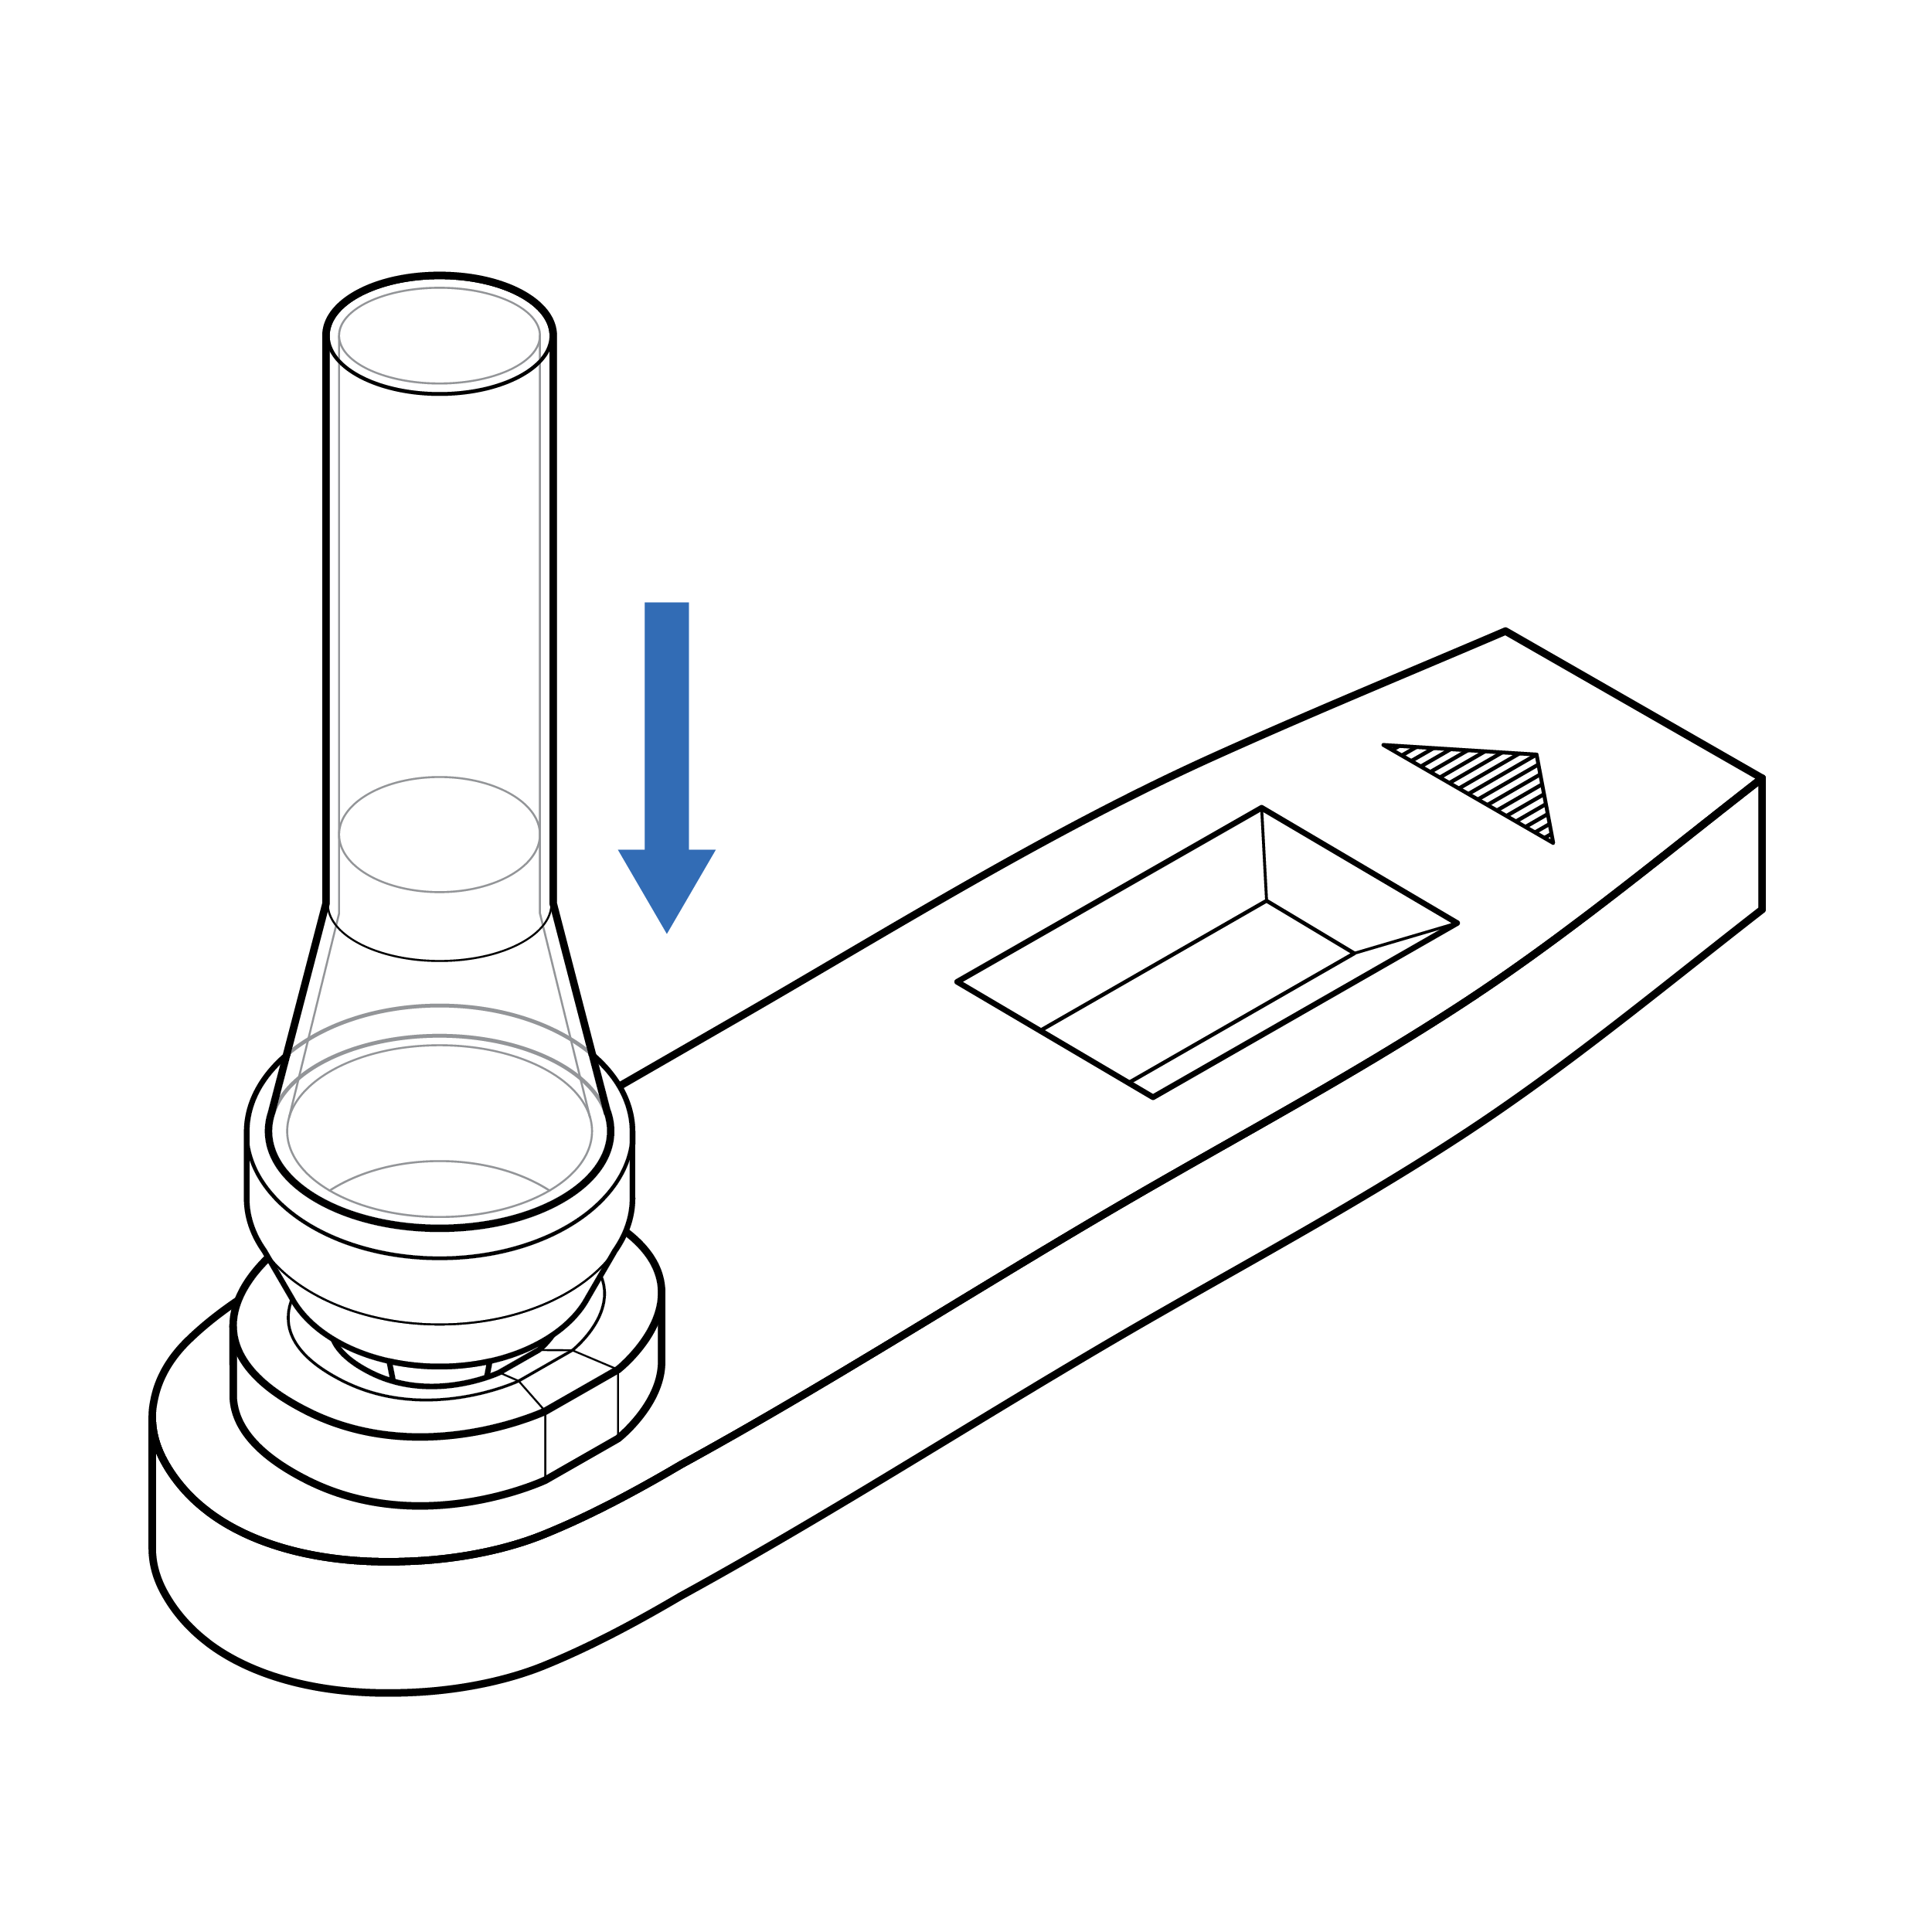 Vial in a vertical orientation, with the dropper cap pointed downward and aligned to a mating feature on the cassette. The mating feature is a raised sample well that aligns the dropper cap to the sample well. A blue arrow indicates that the two parts have been aligned correctly.